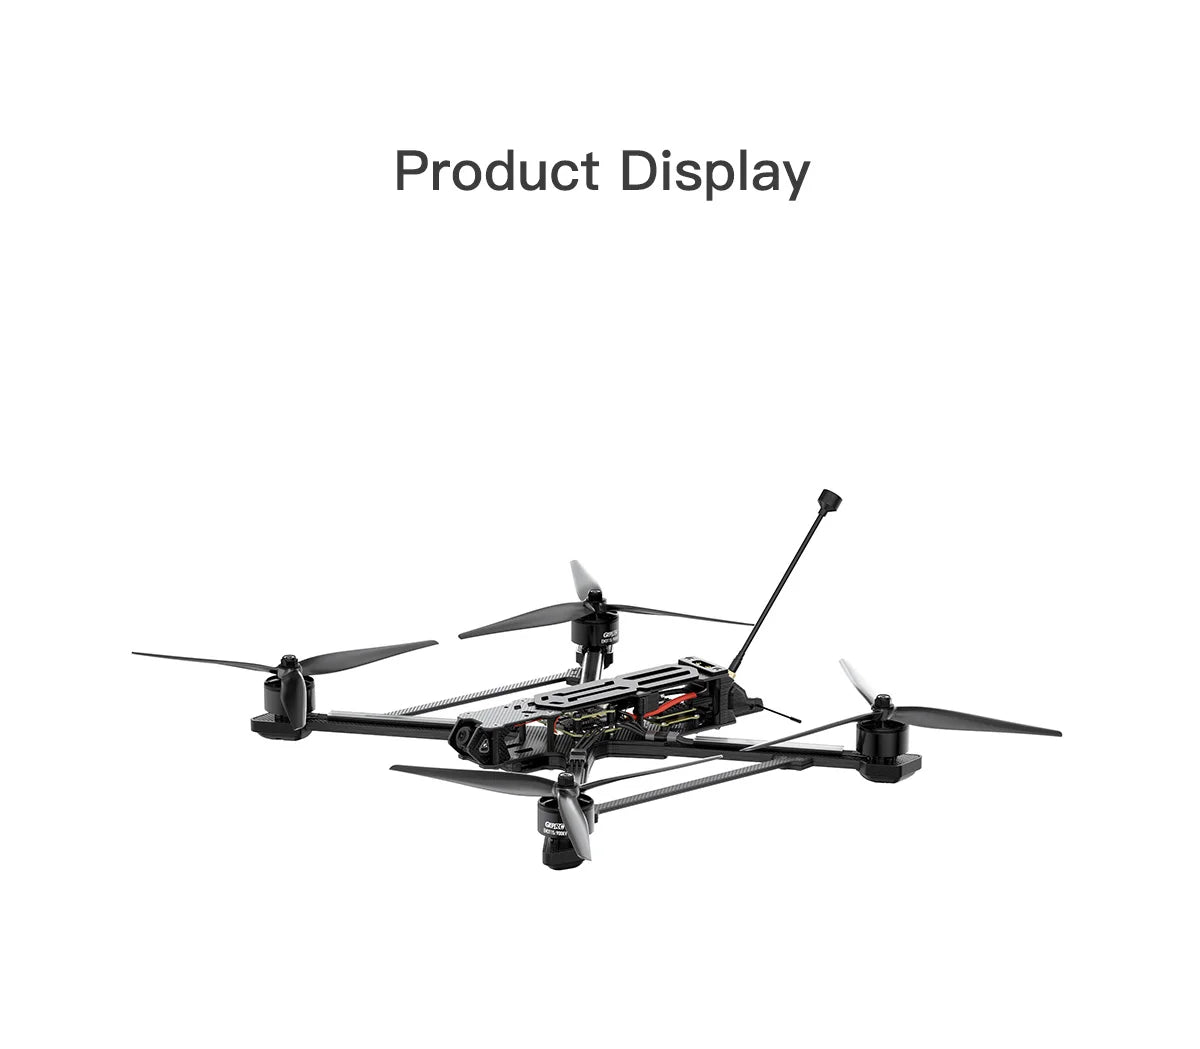 GEPRC EF10 5.8G 1.6W Long Range 10inch FPV, the customer must get warranty support directly from the 3rd party company Purchasing Matters 